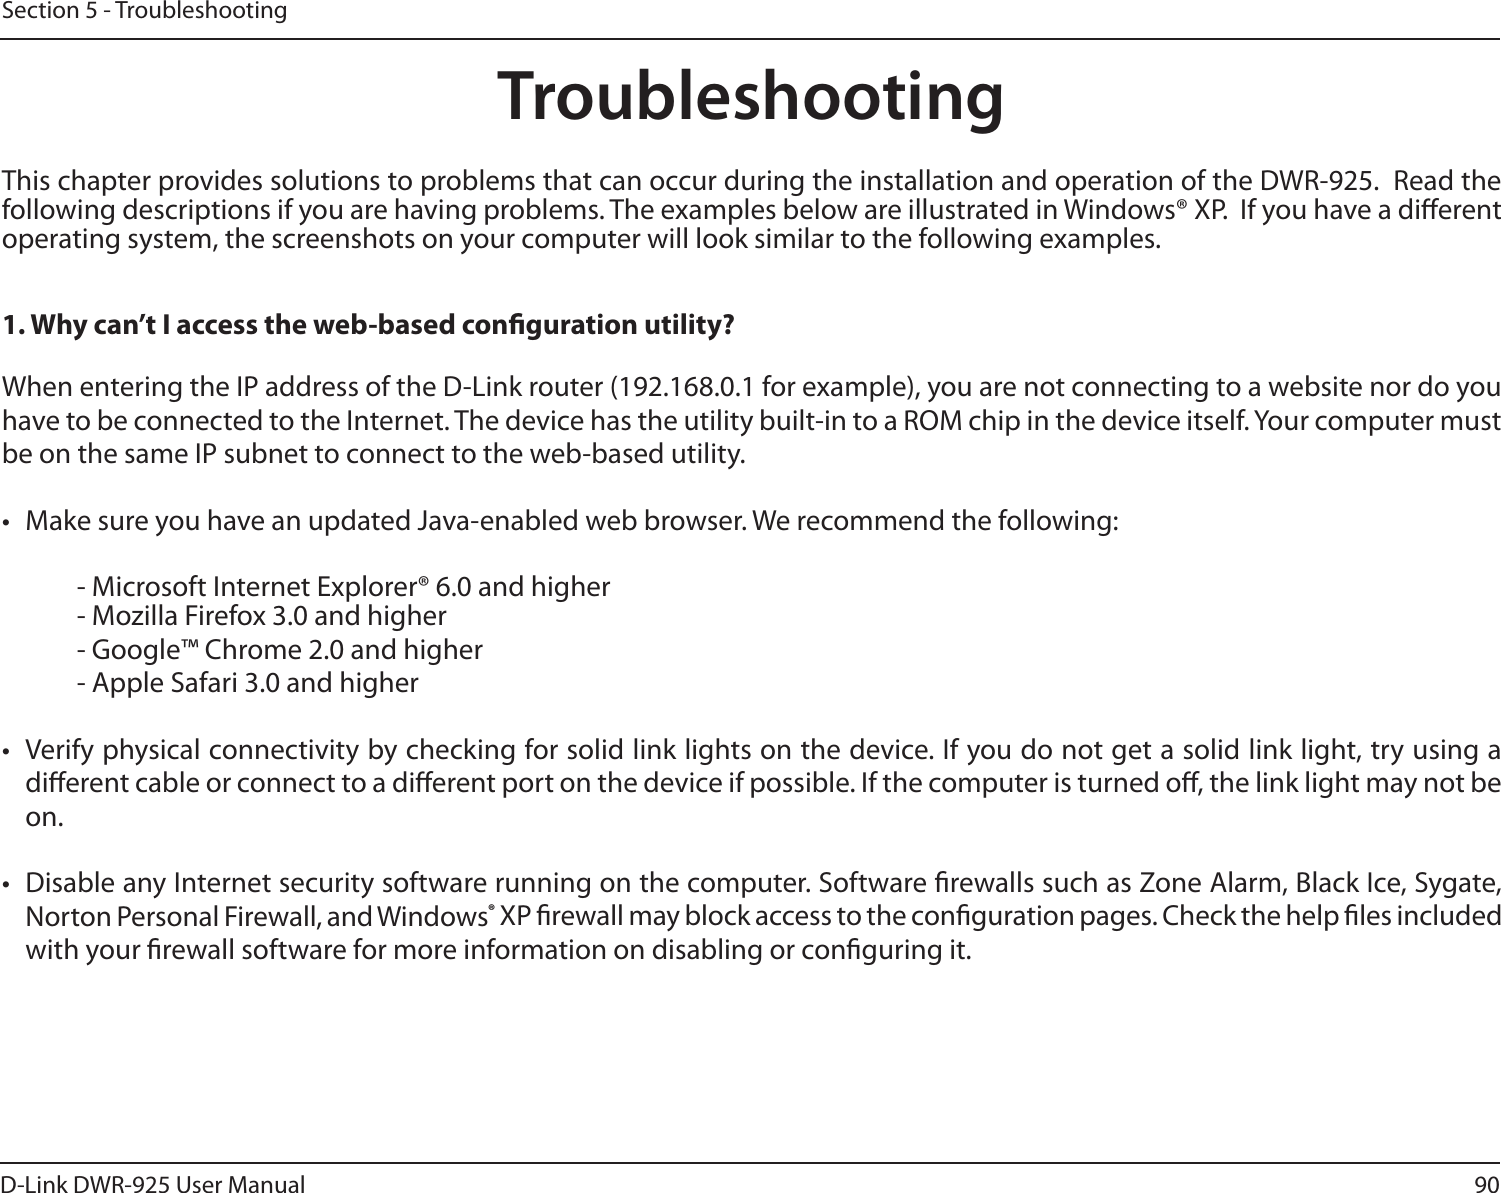 90D-Link DWR-925 User ManualSection 5 - TroubleshootingTroubleshootingThis chapter provides solutions to problems that can occur during the installation and operation of the DWR-925.  Read the following descriptions if you are having problems. The examples below are illustrated in Windows® XP.  If you have a dierent operating system, the screenshots on your computer will look similar to the following examples.1. Why can’t I access the web-based conguration utility?When entering the IP address of the D-Link router (192.168.0.1 for example), you are not connecting to a website nor do you have to be connected to the Internet. The device has the utility built-in to a ROM chip in the device itself. Your computer must be on the same IP subnet to connect to the web-based utility.     - Microsoft Internet Explorer® 6.0 and higher  - Mozilla Firefox 3.0 and higher  - Google™ Chrome 2.0 and higher  - Apple Safari 3.0 and higher dierent cable or connect to a dierent port on the device if possible. If the computer is turned o, the link light may not be on. Norton Personal Firewall, and Windows® XP rewall may block access to the conguration pages. Check the help les included with your rewall software for more information on disabling or conguring it.